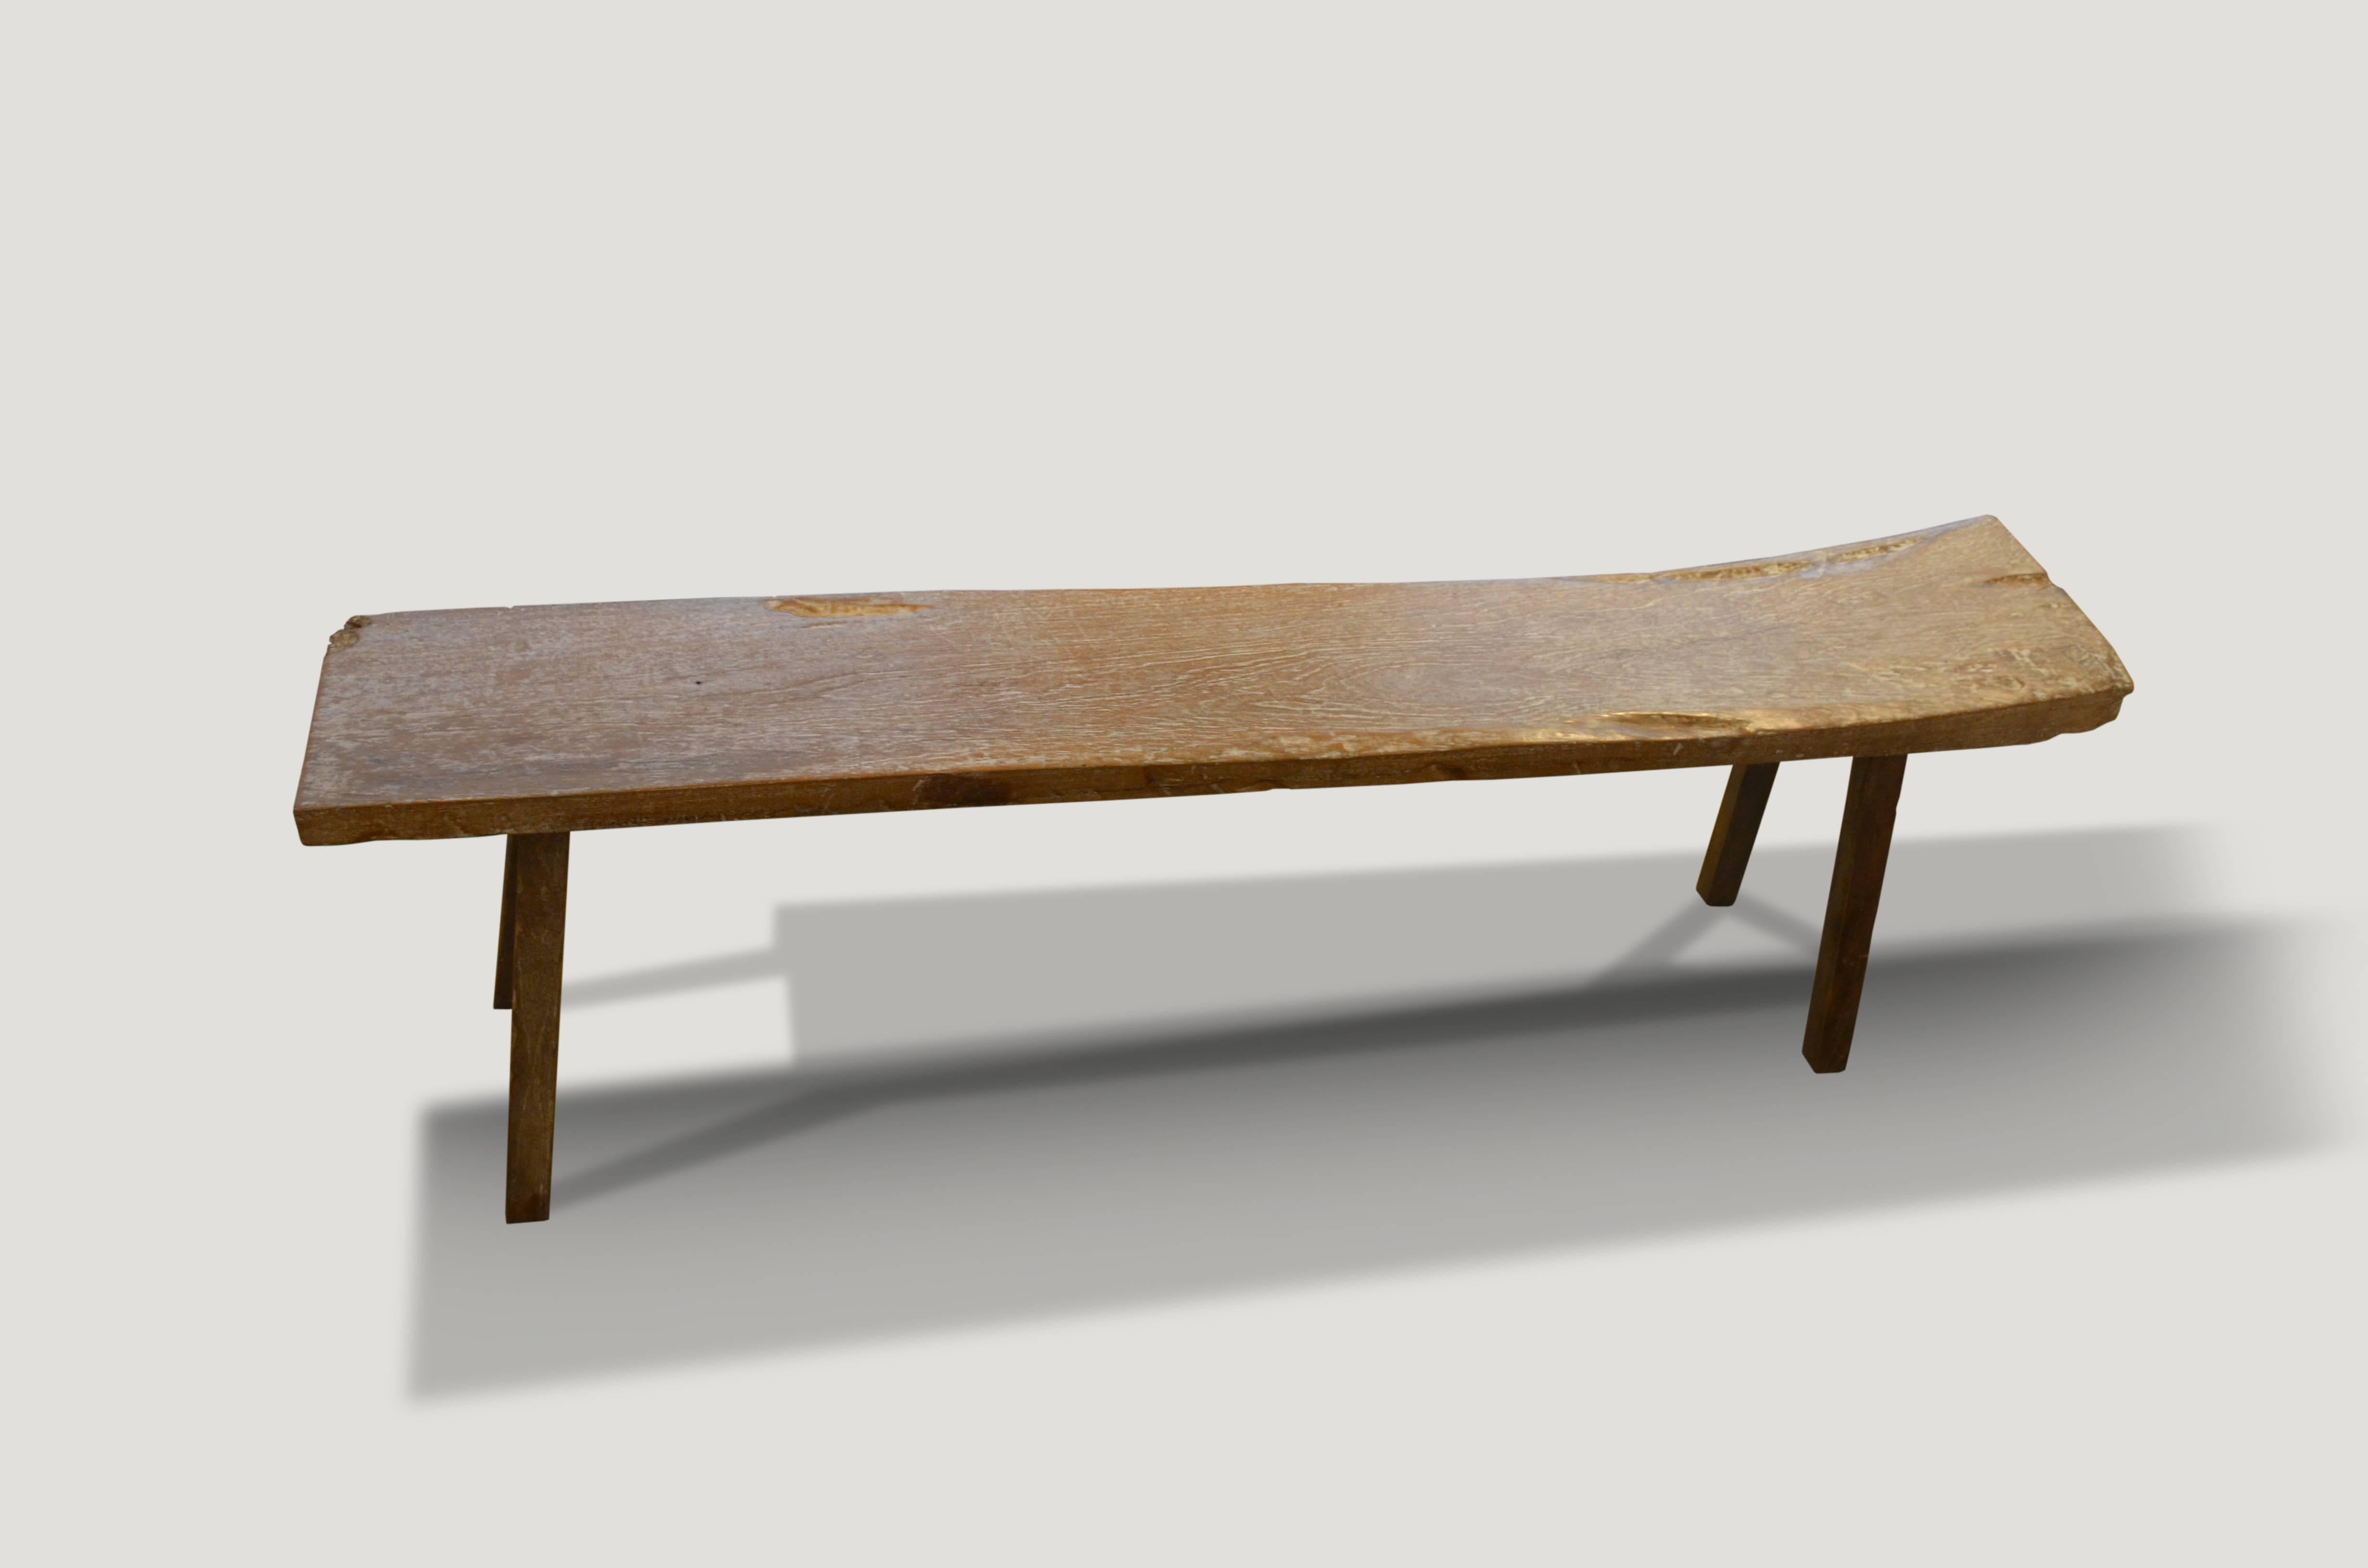 Antique 2” single slab, natural aged teak wood bench or shelf.

This bench or shelf was sourced in the spirit of wabi-sabi, a Japanese philosophy that beauty can be found in imperfection and impermanence. It’s a beauty of things modest and humble.